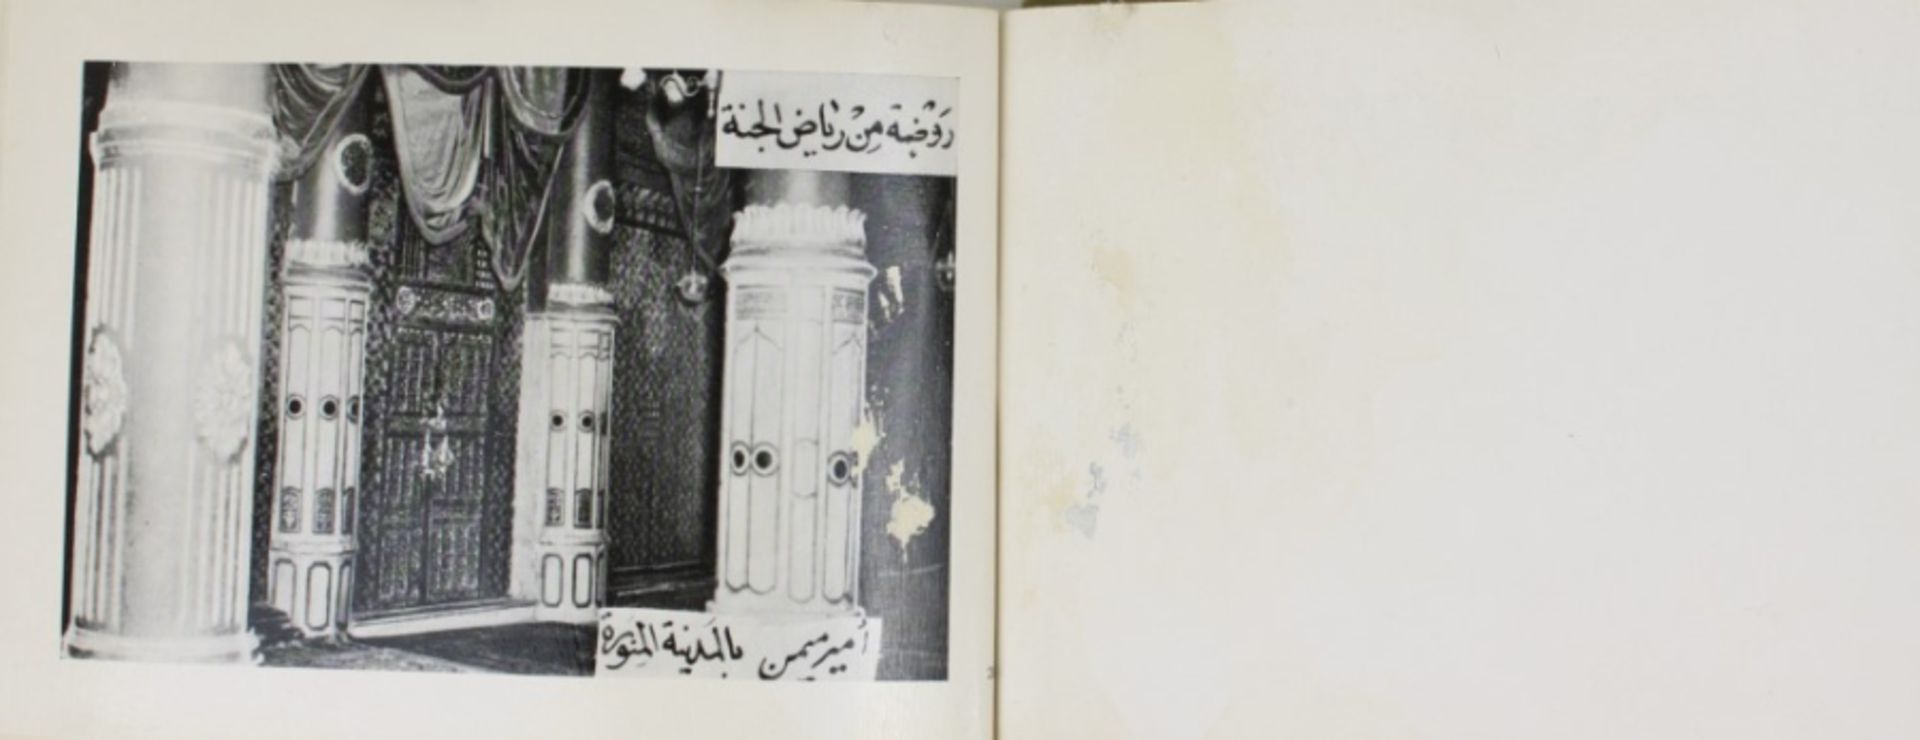 1930 Album with photographs of Mecca - Image 18 of 24